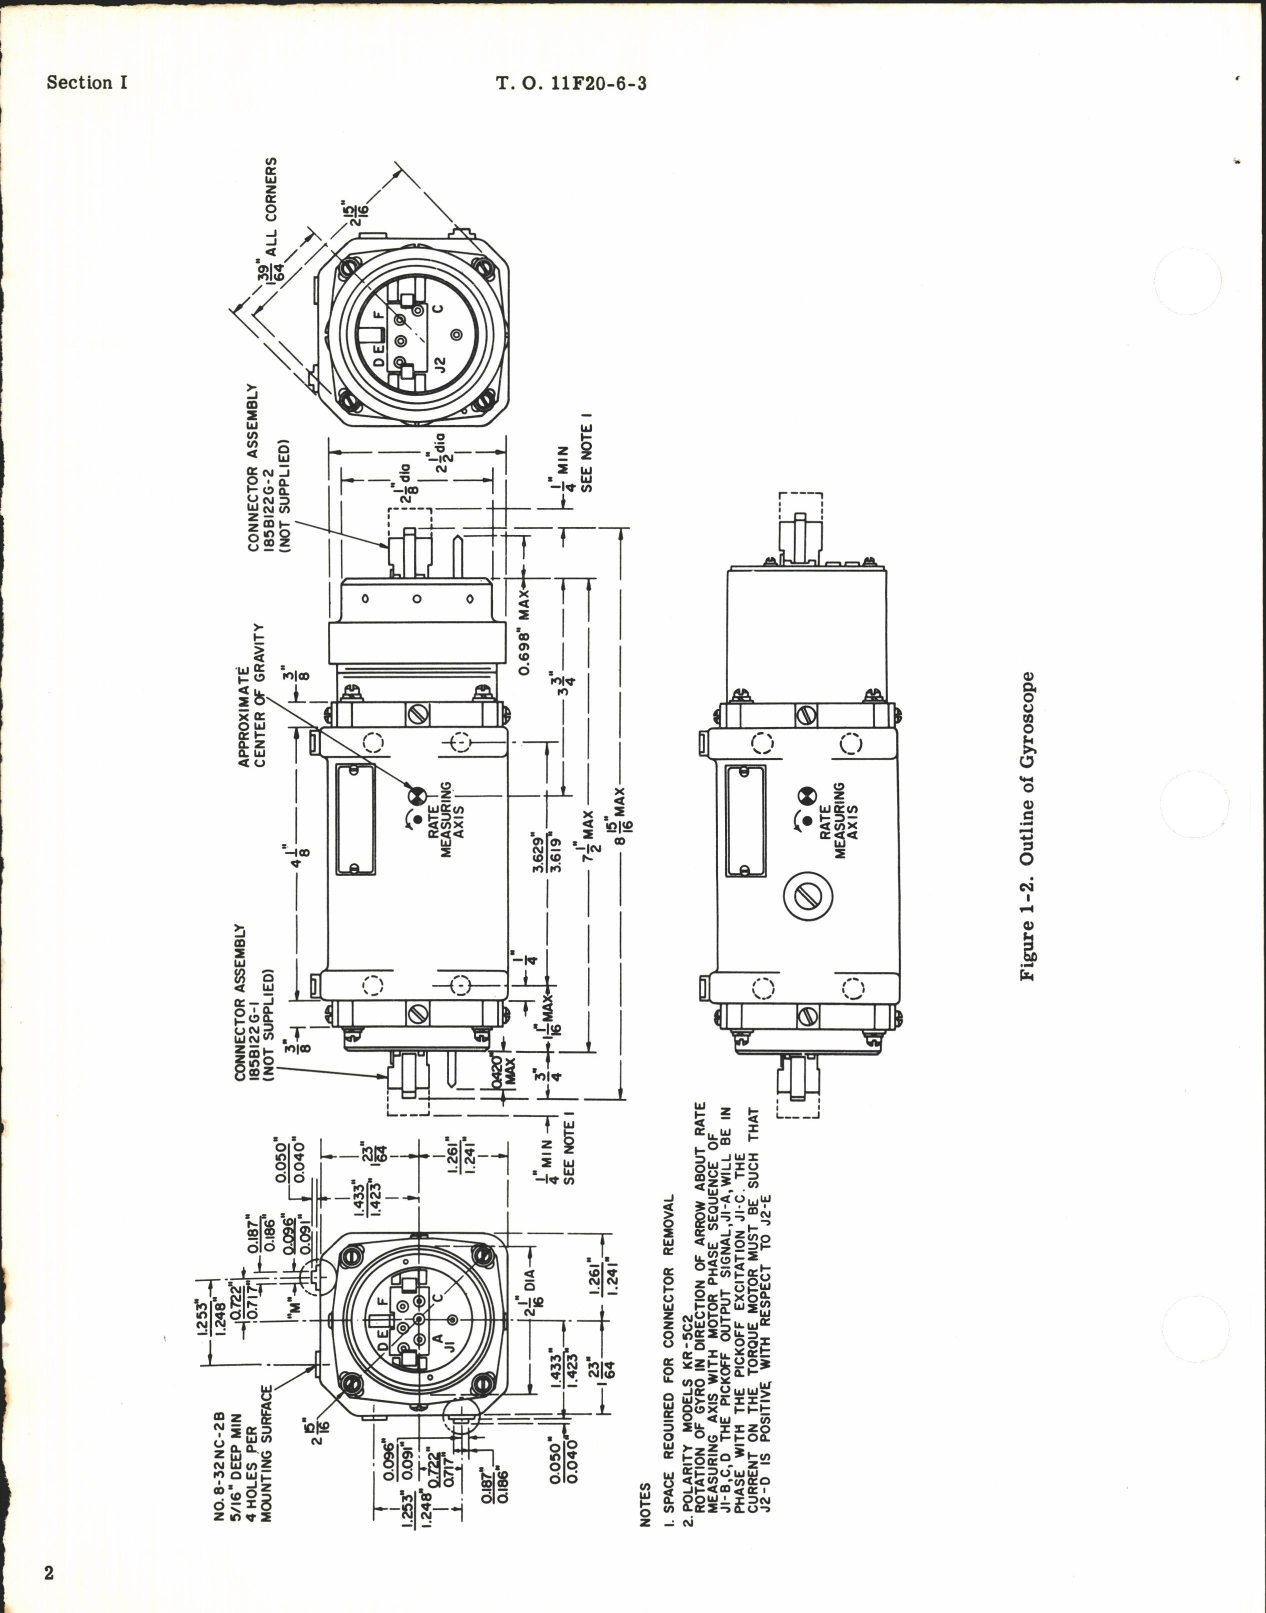 Sample page 6 from AirCorps Library document: Overhaul Instructions for Rate Gyroscope Part No. 147D357G2, Type KR-5C2